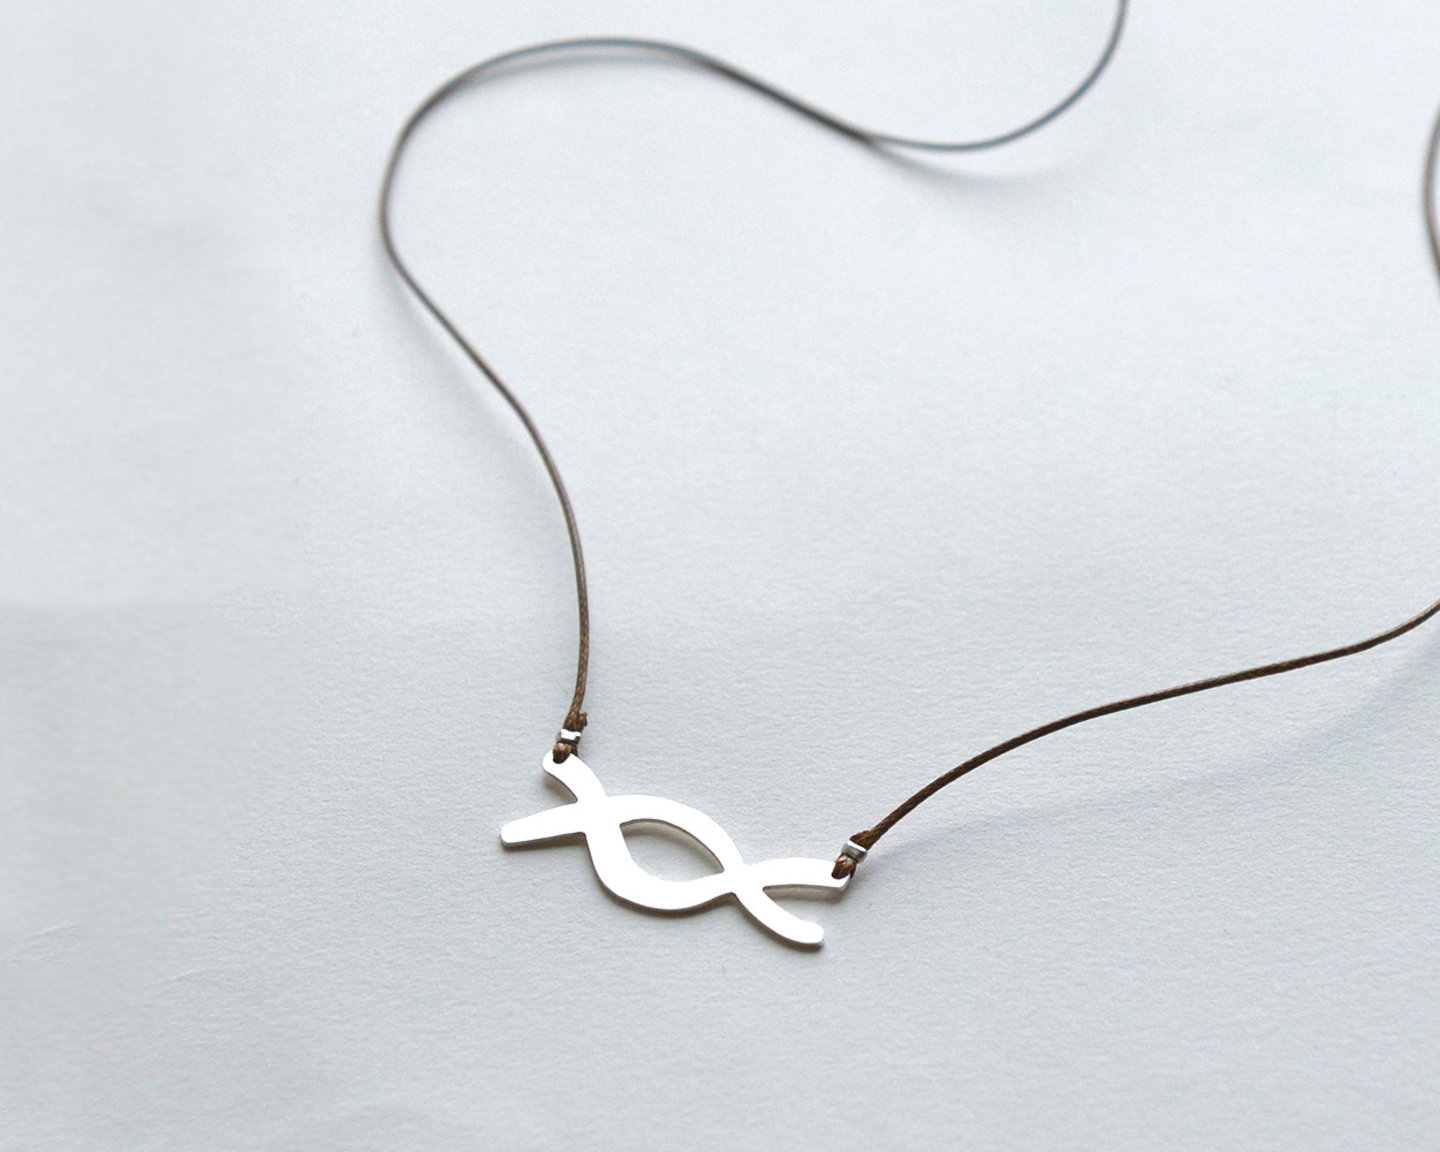 Silver-plated "XX" necklace